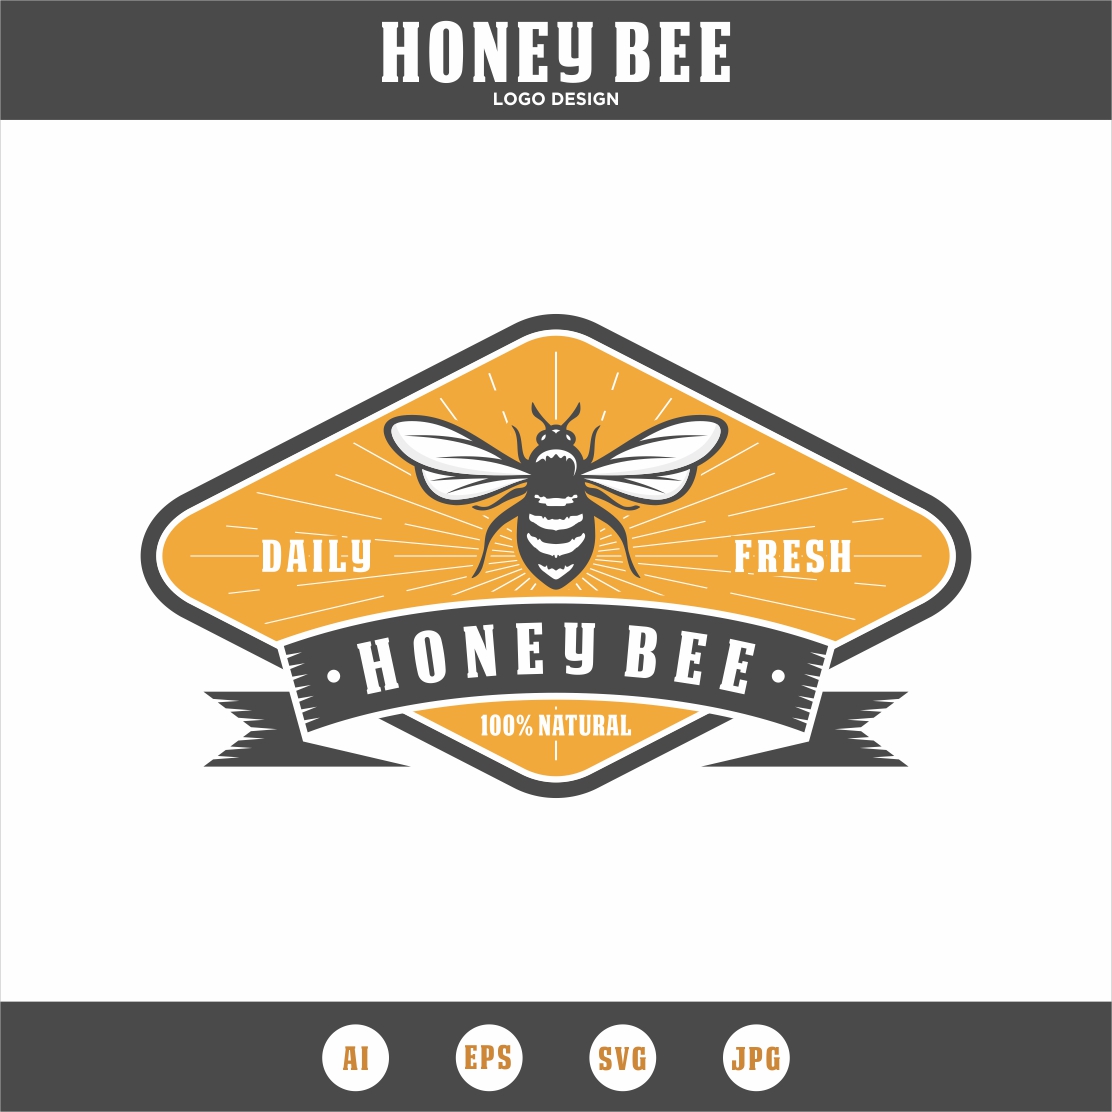 Honey Bee logo design - only 7$ cover image.